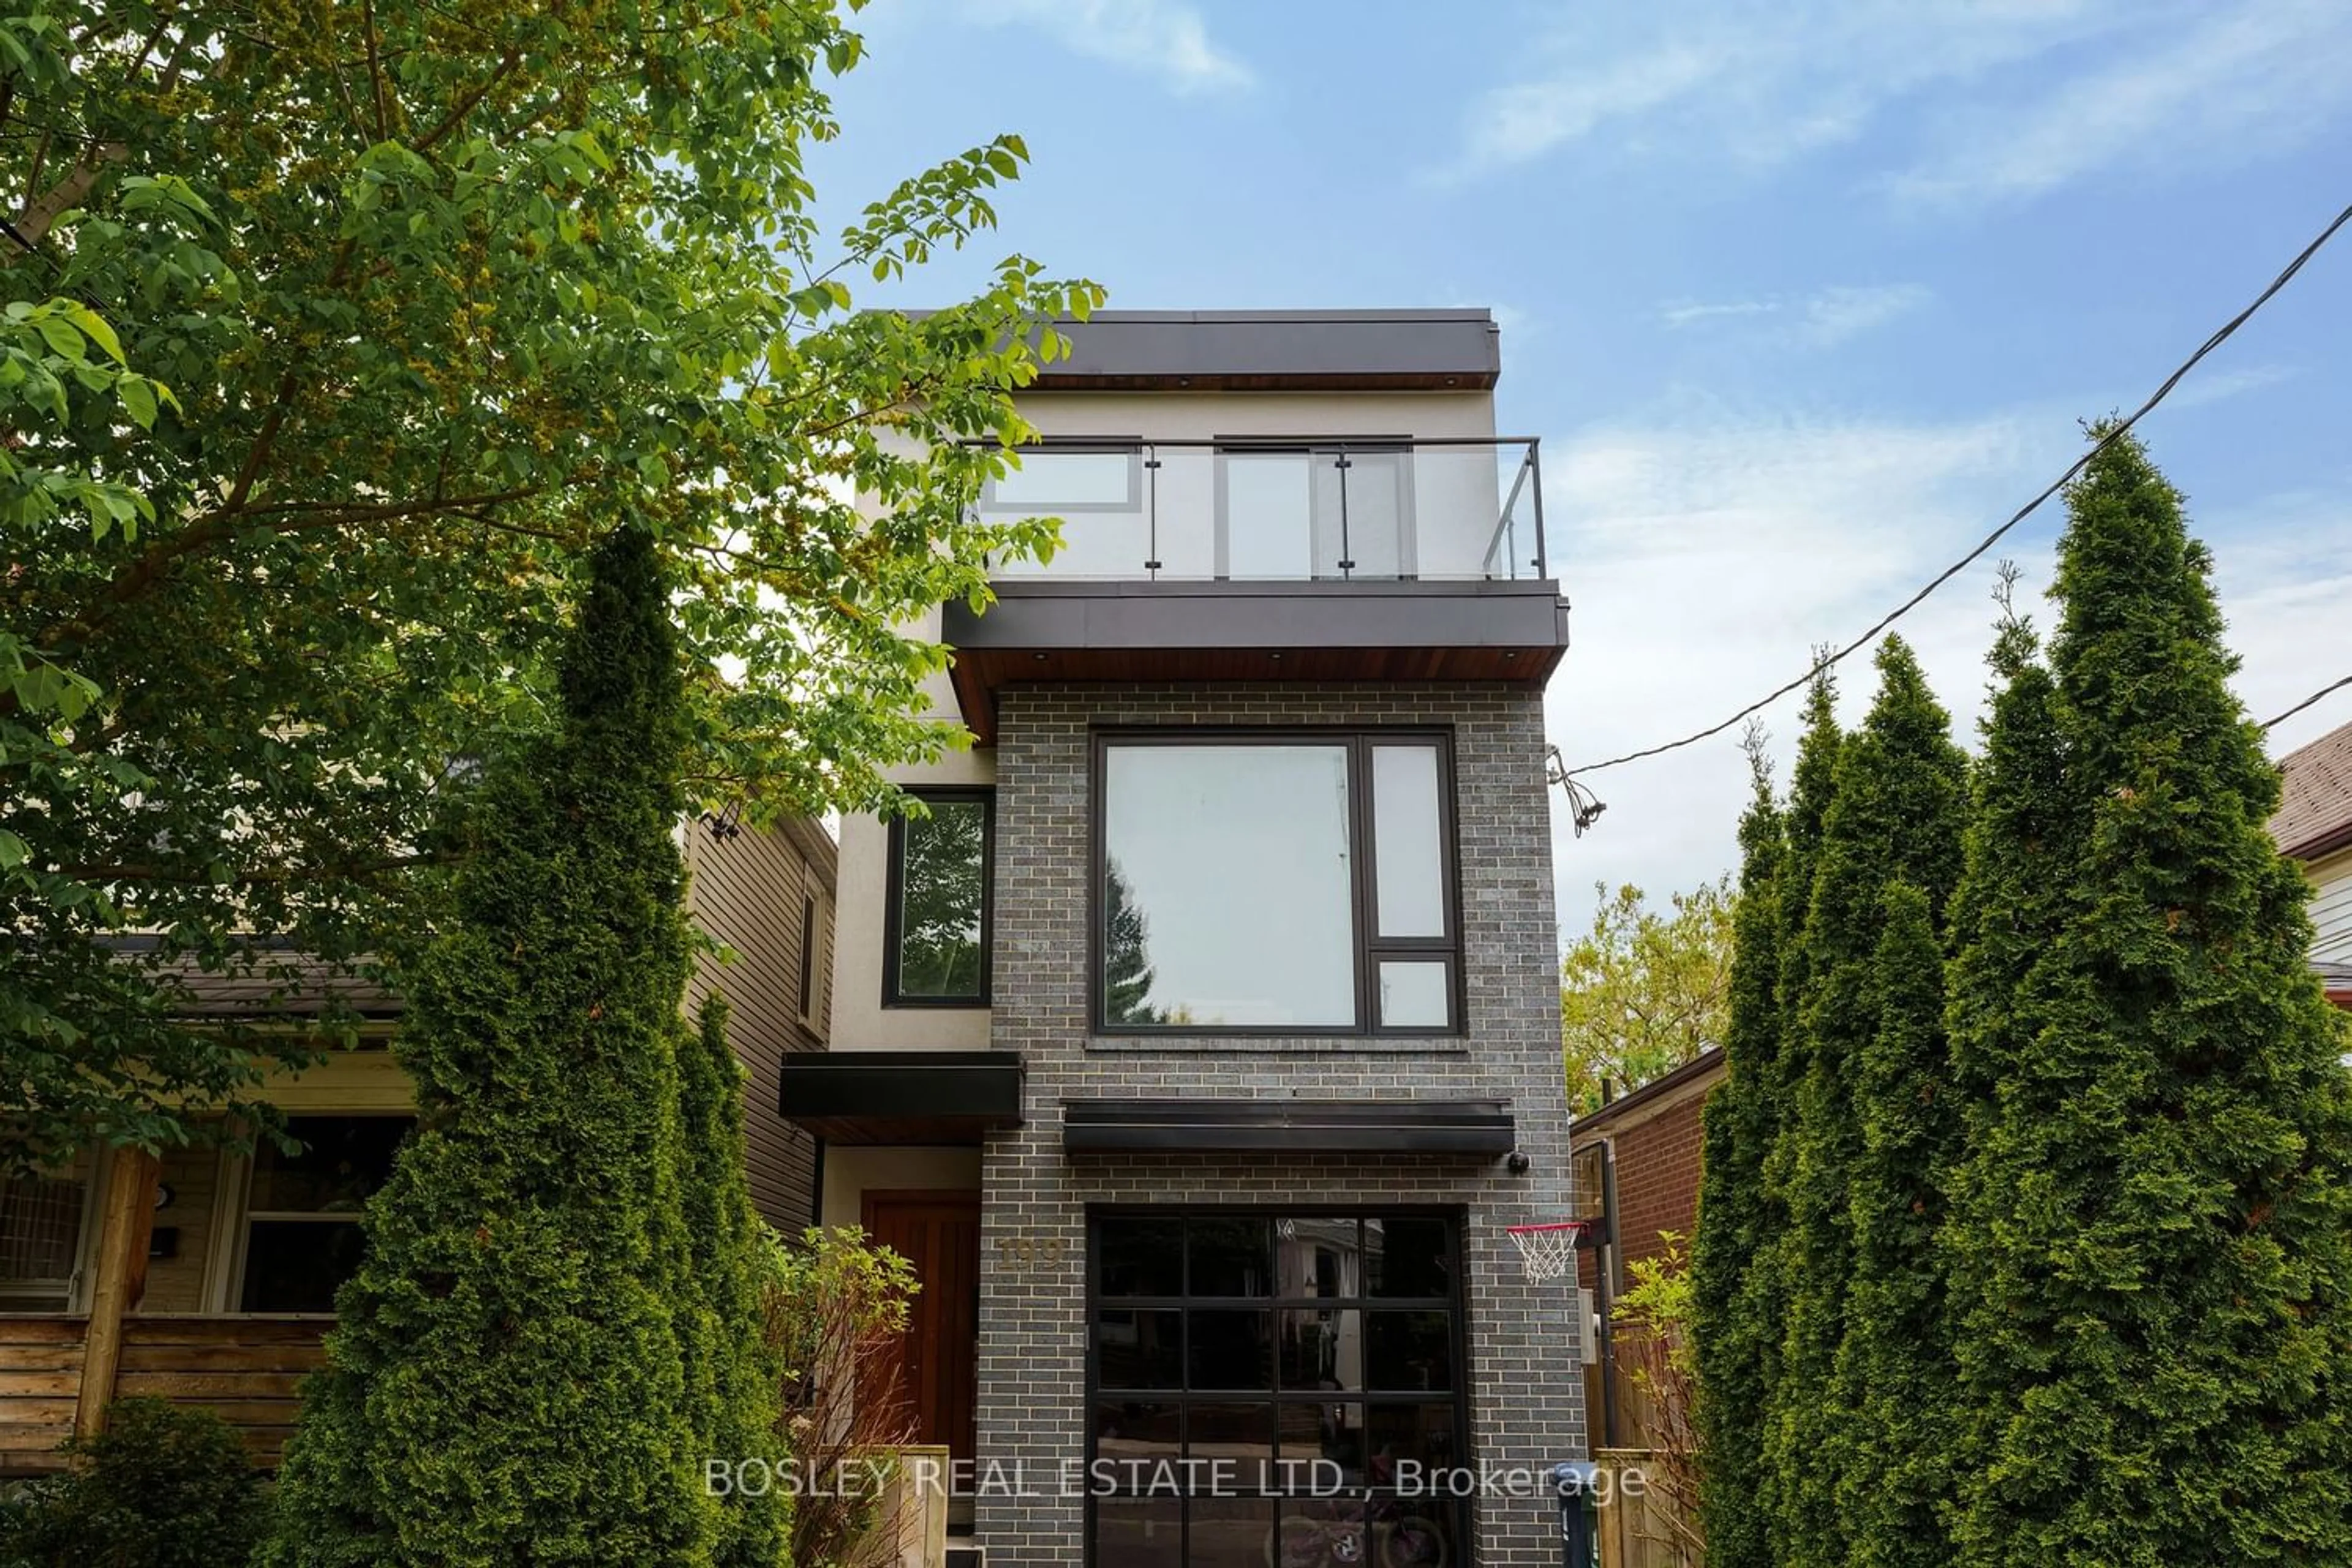 Home with brick exterior material for 199 Yarmouth Rd, Toronto Ontario M6G 1X5